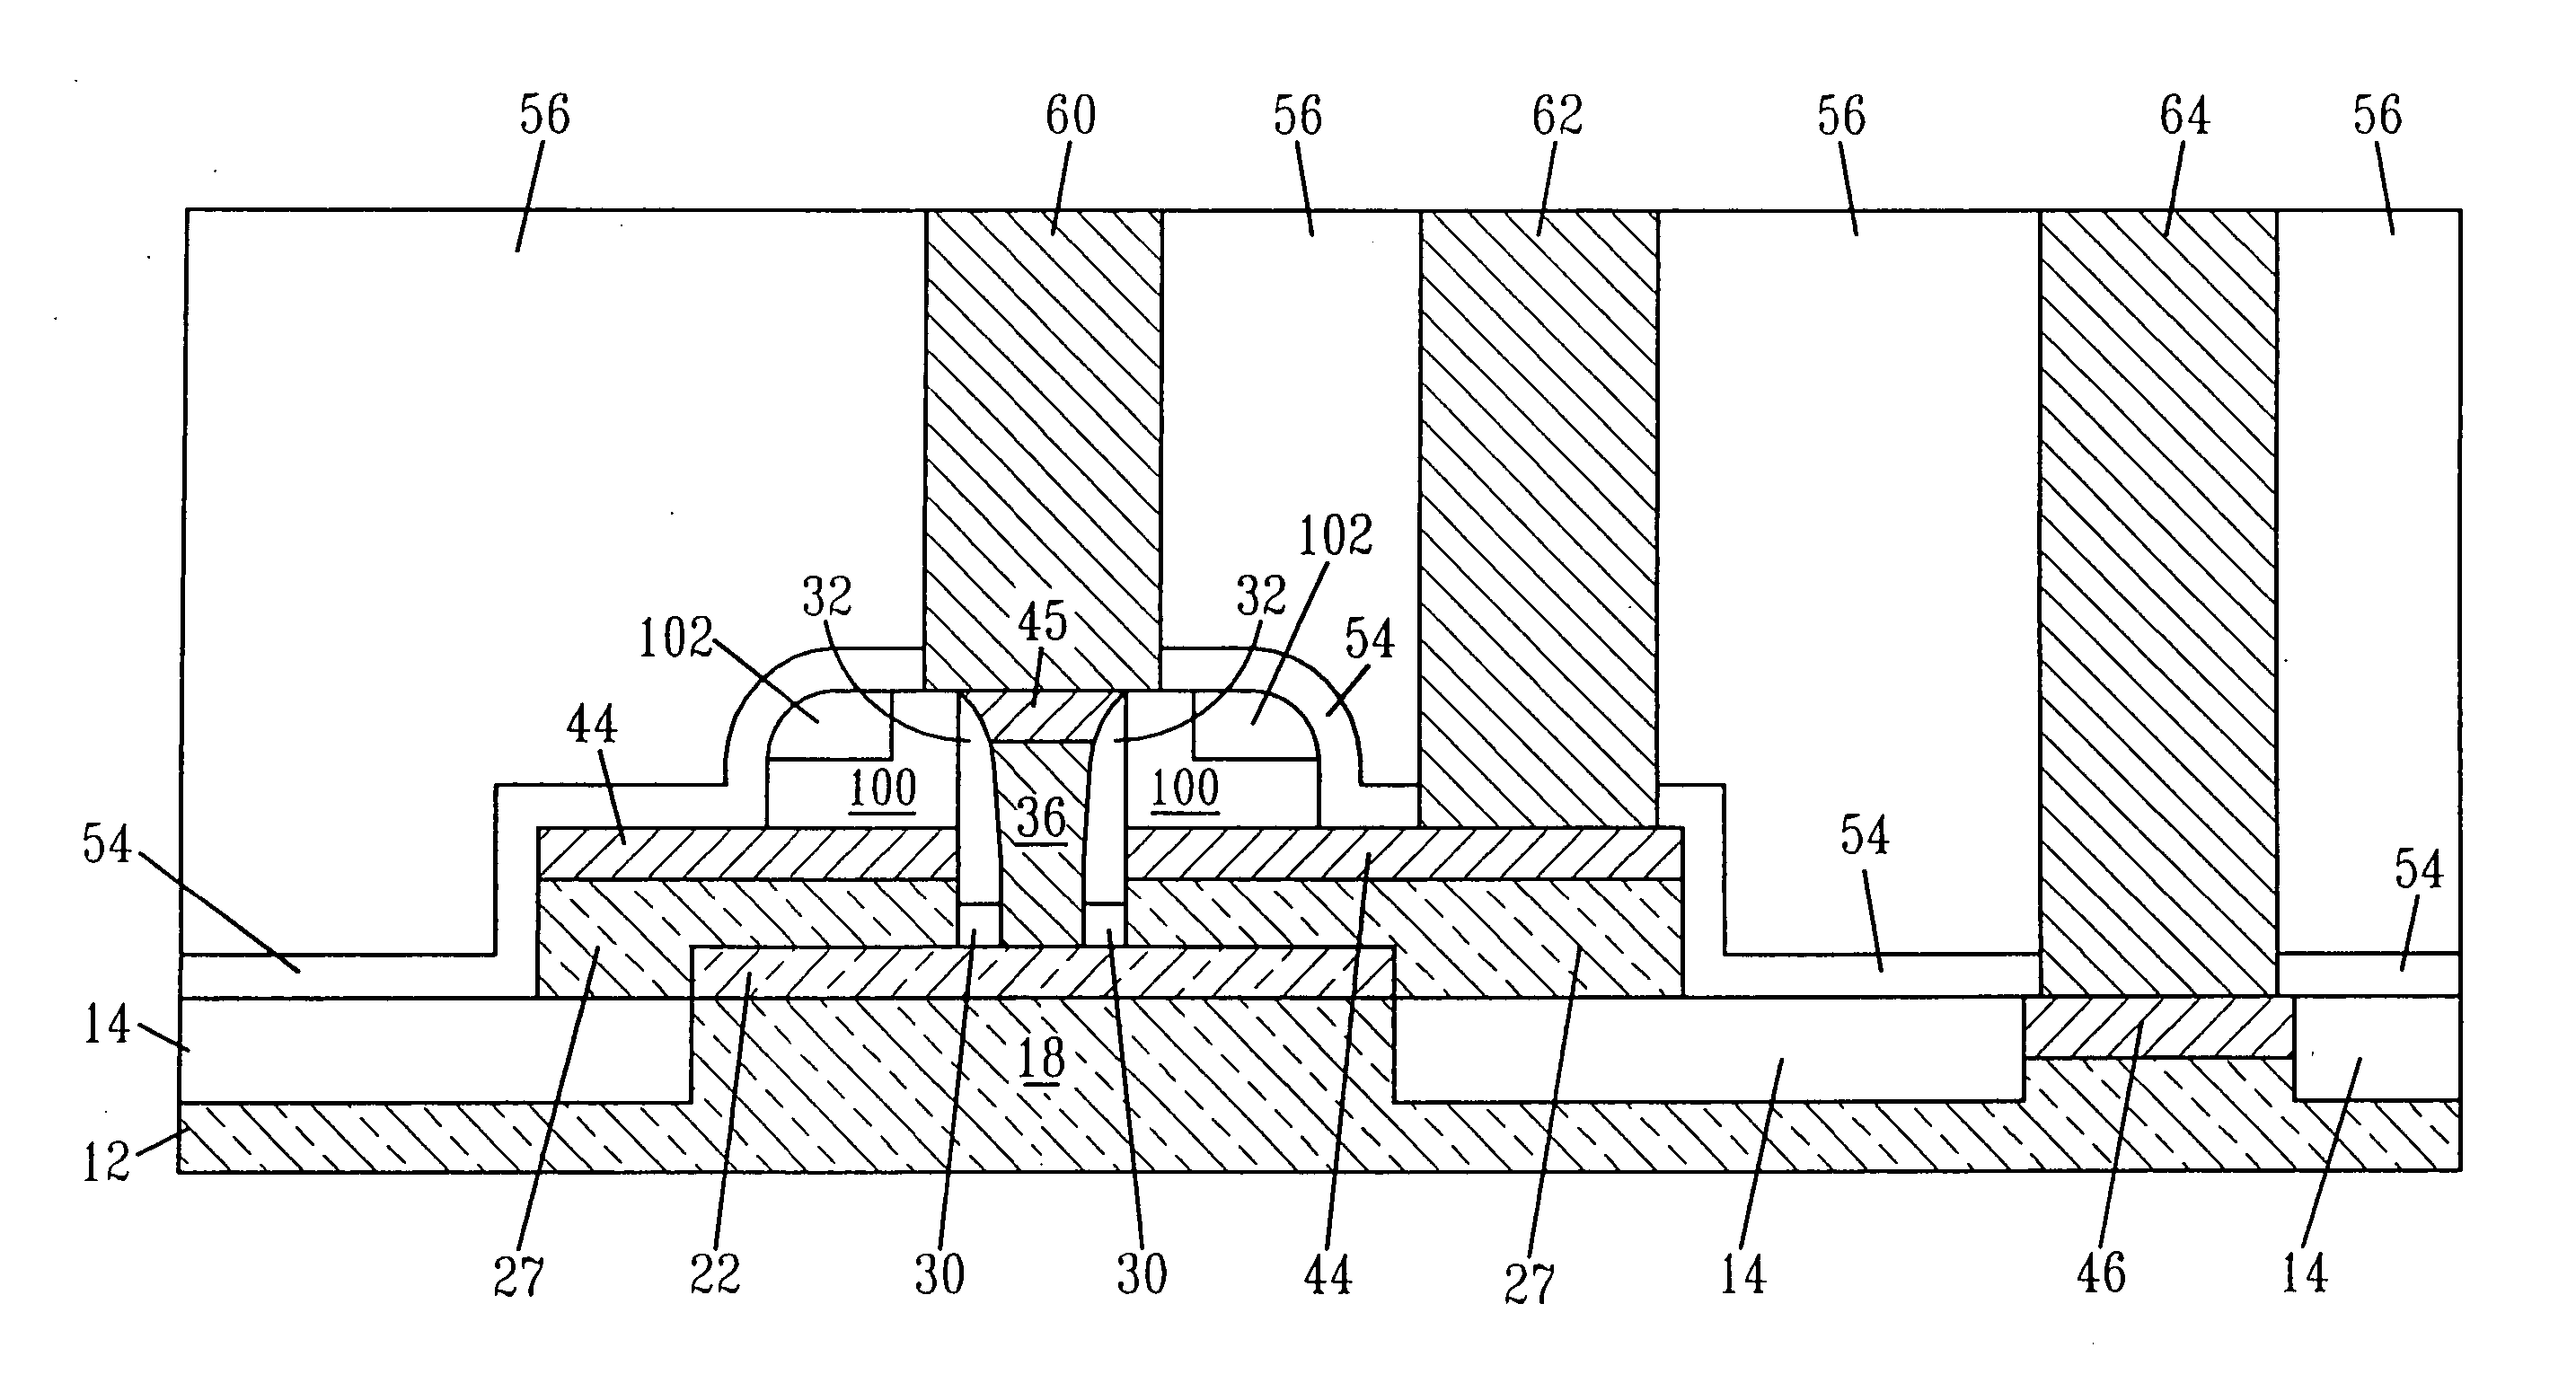 Bipolar transistor having self-aligned silicide and a self-aligned emitter contact border